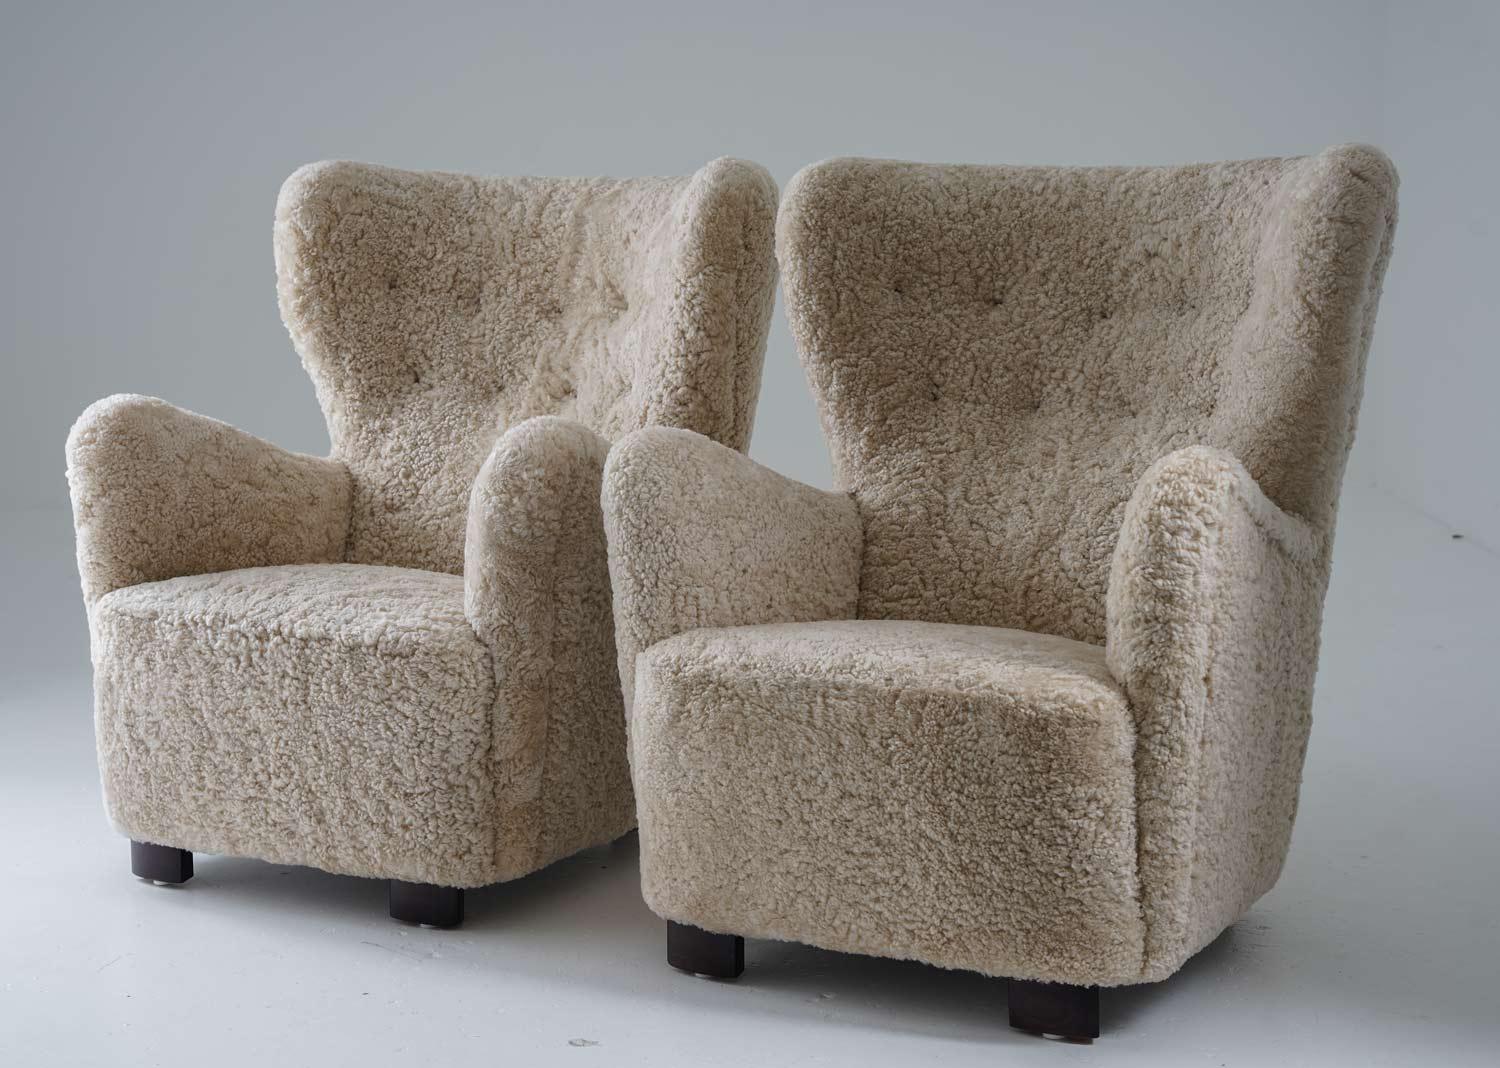 Pair of large high-back lounge chairs manufactured in Denmark, 1930s. 
These majestic chairs surround you with their curved backrest and are just as comfortable as they look. 
They've been reupholstered in honey-colored sheepskin and cognac